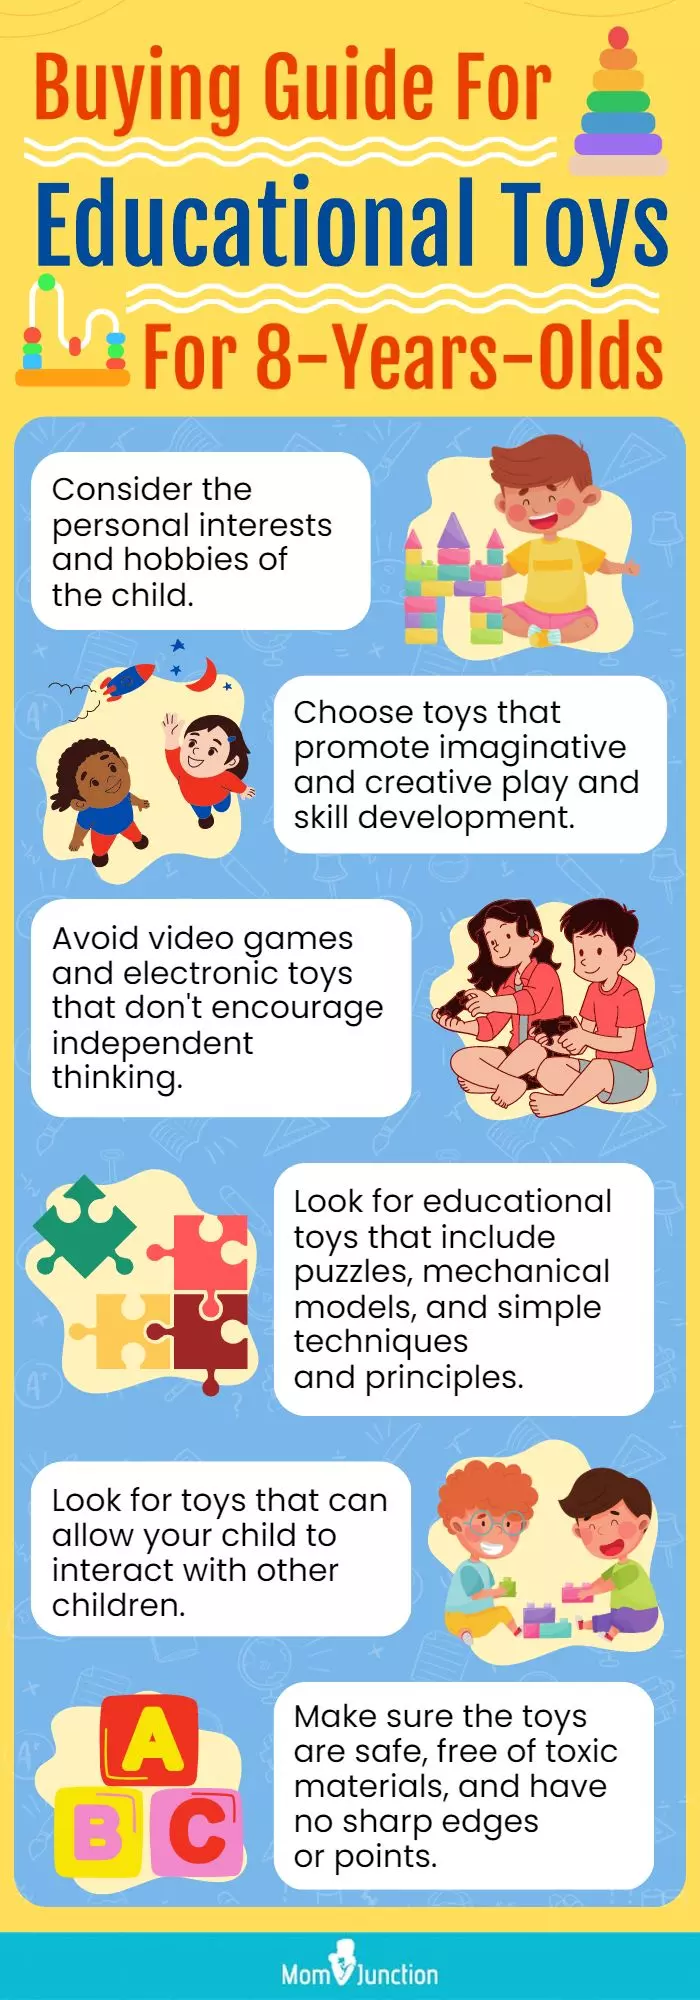 Buying Guide For Educational Toys For 8-Years-Olds (infographic)